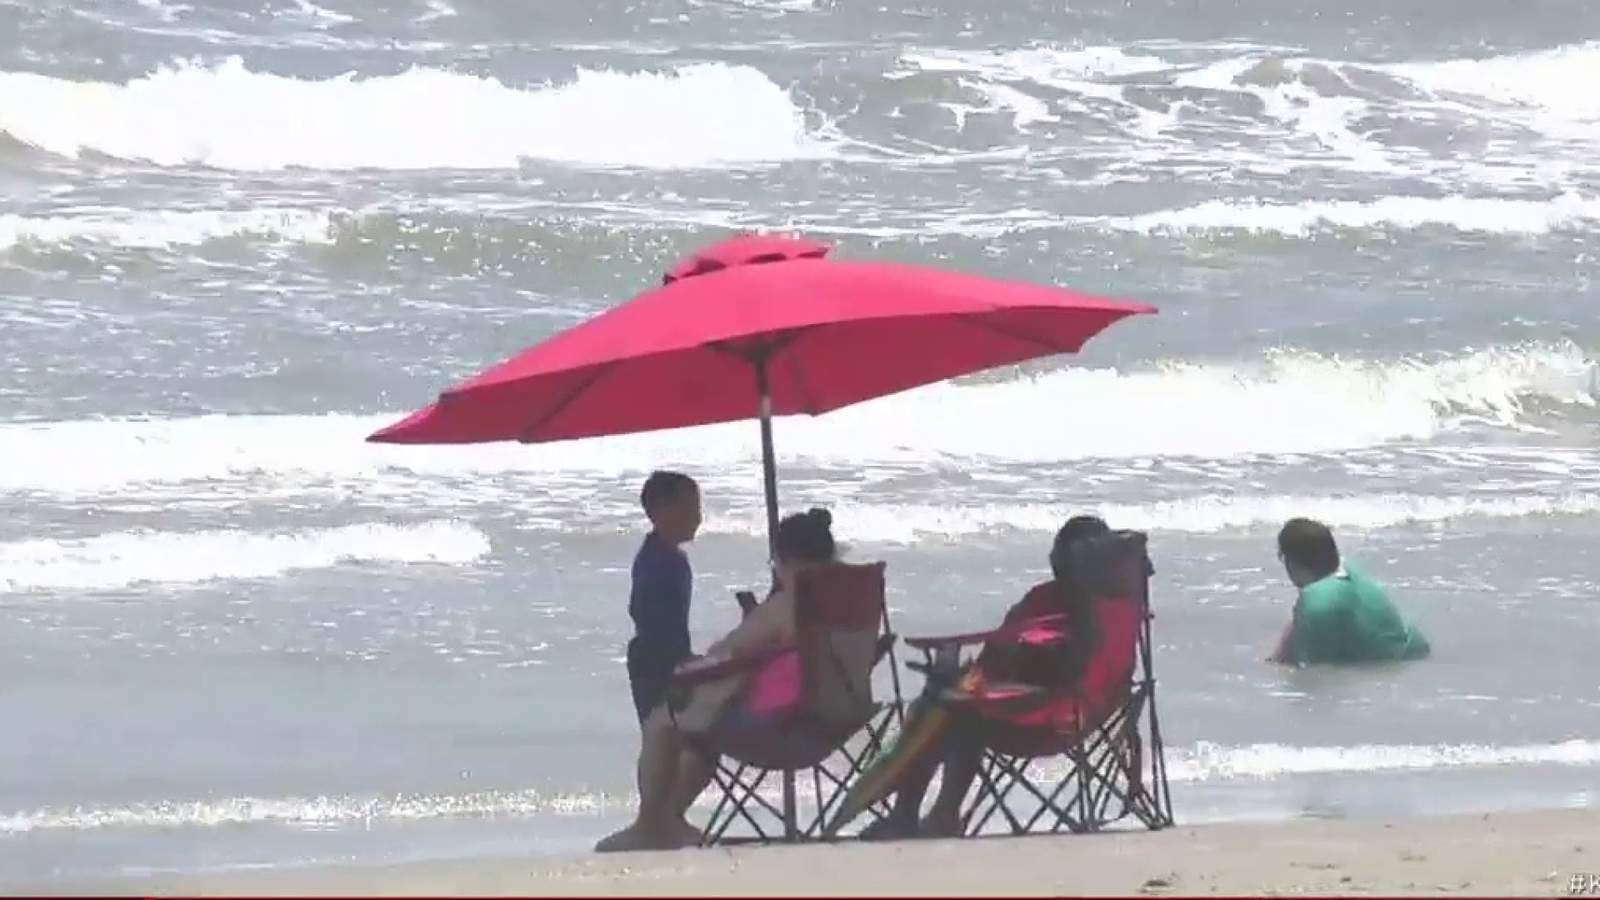 Port Aransas prepares to welcome beachgoers back for Memorial Day weekend